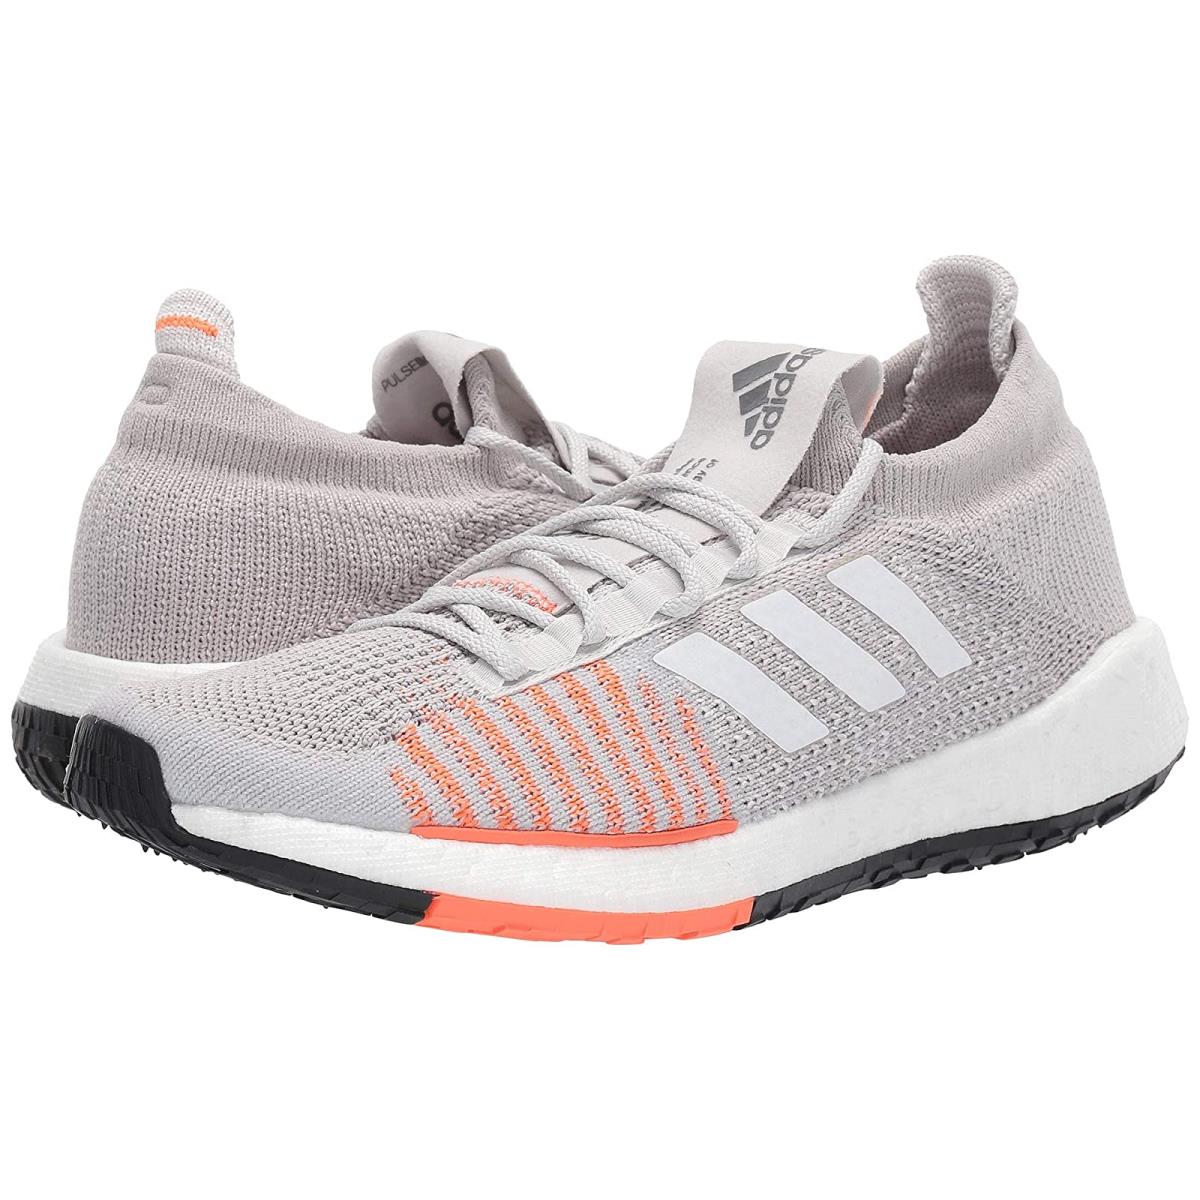 Woman`s Sneakers Athletic Shoes Adidas Running Pulseboost HD Grey/White/Solar Red